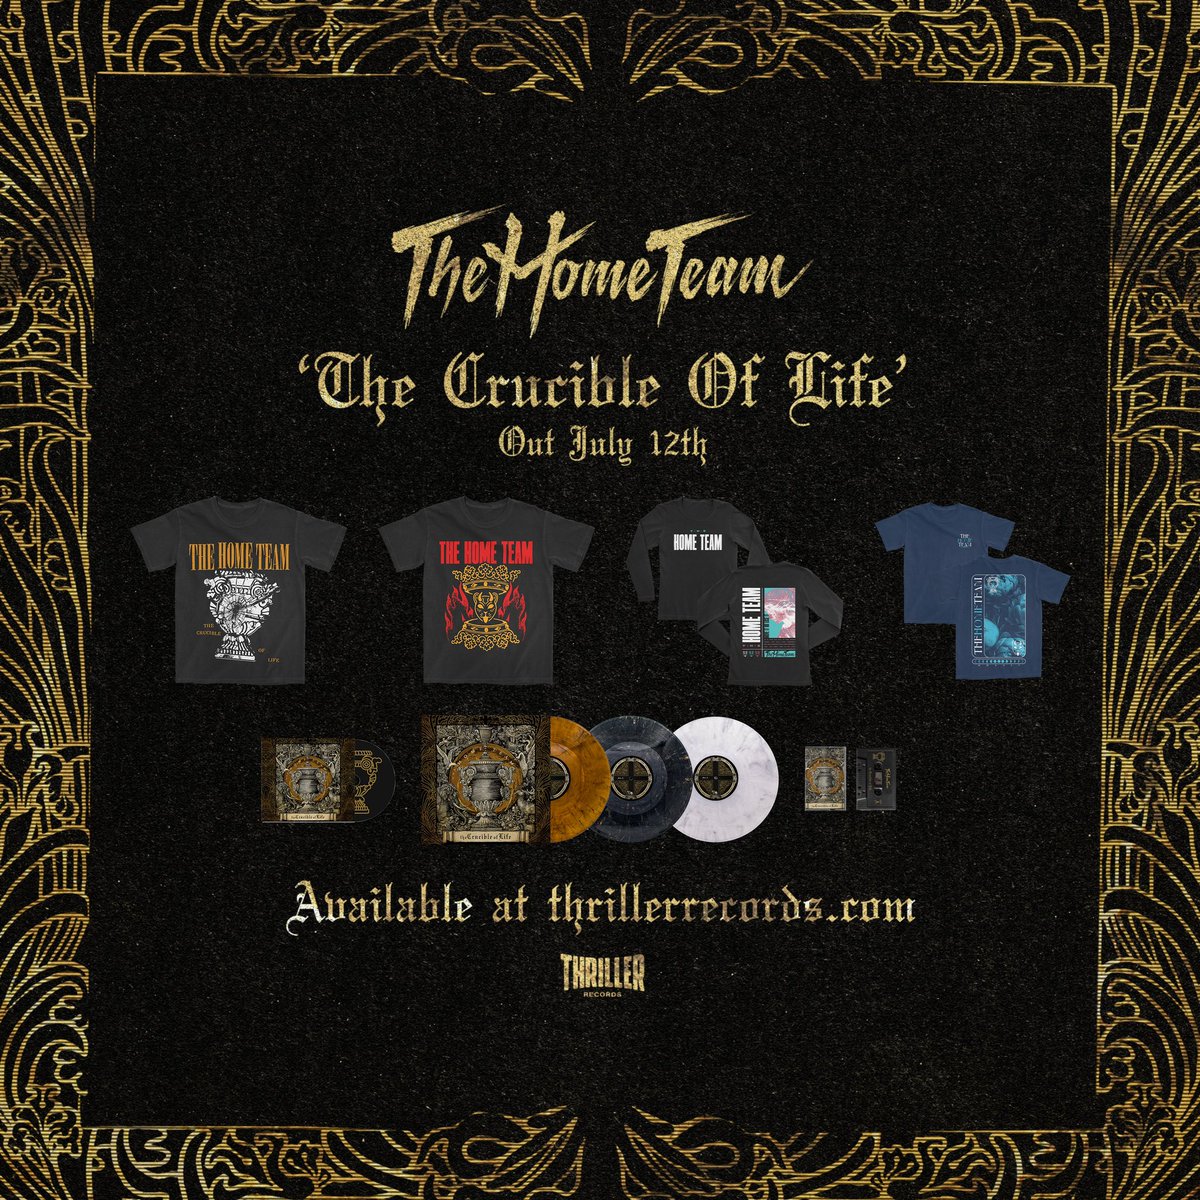 Our third LP, The Crucible of Life, will be released July 12th on Thriller Records. We’ve put everything into this record, and we can’t wait for you to hear it. Pre-order packages are available now at thrillerrecords.com/collections/th…